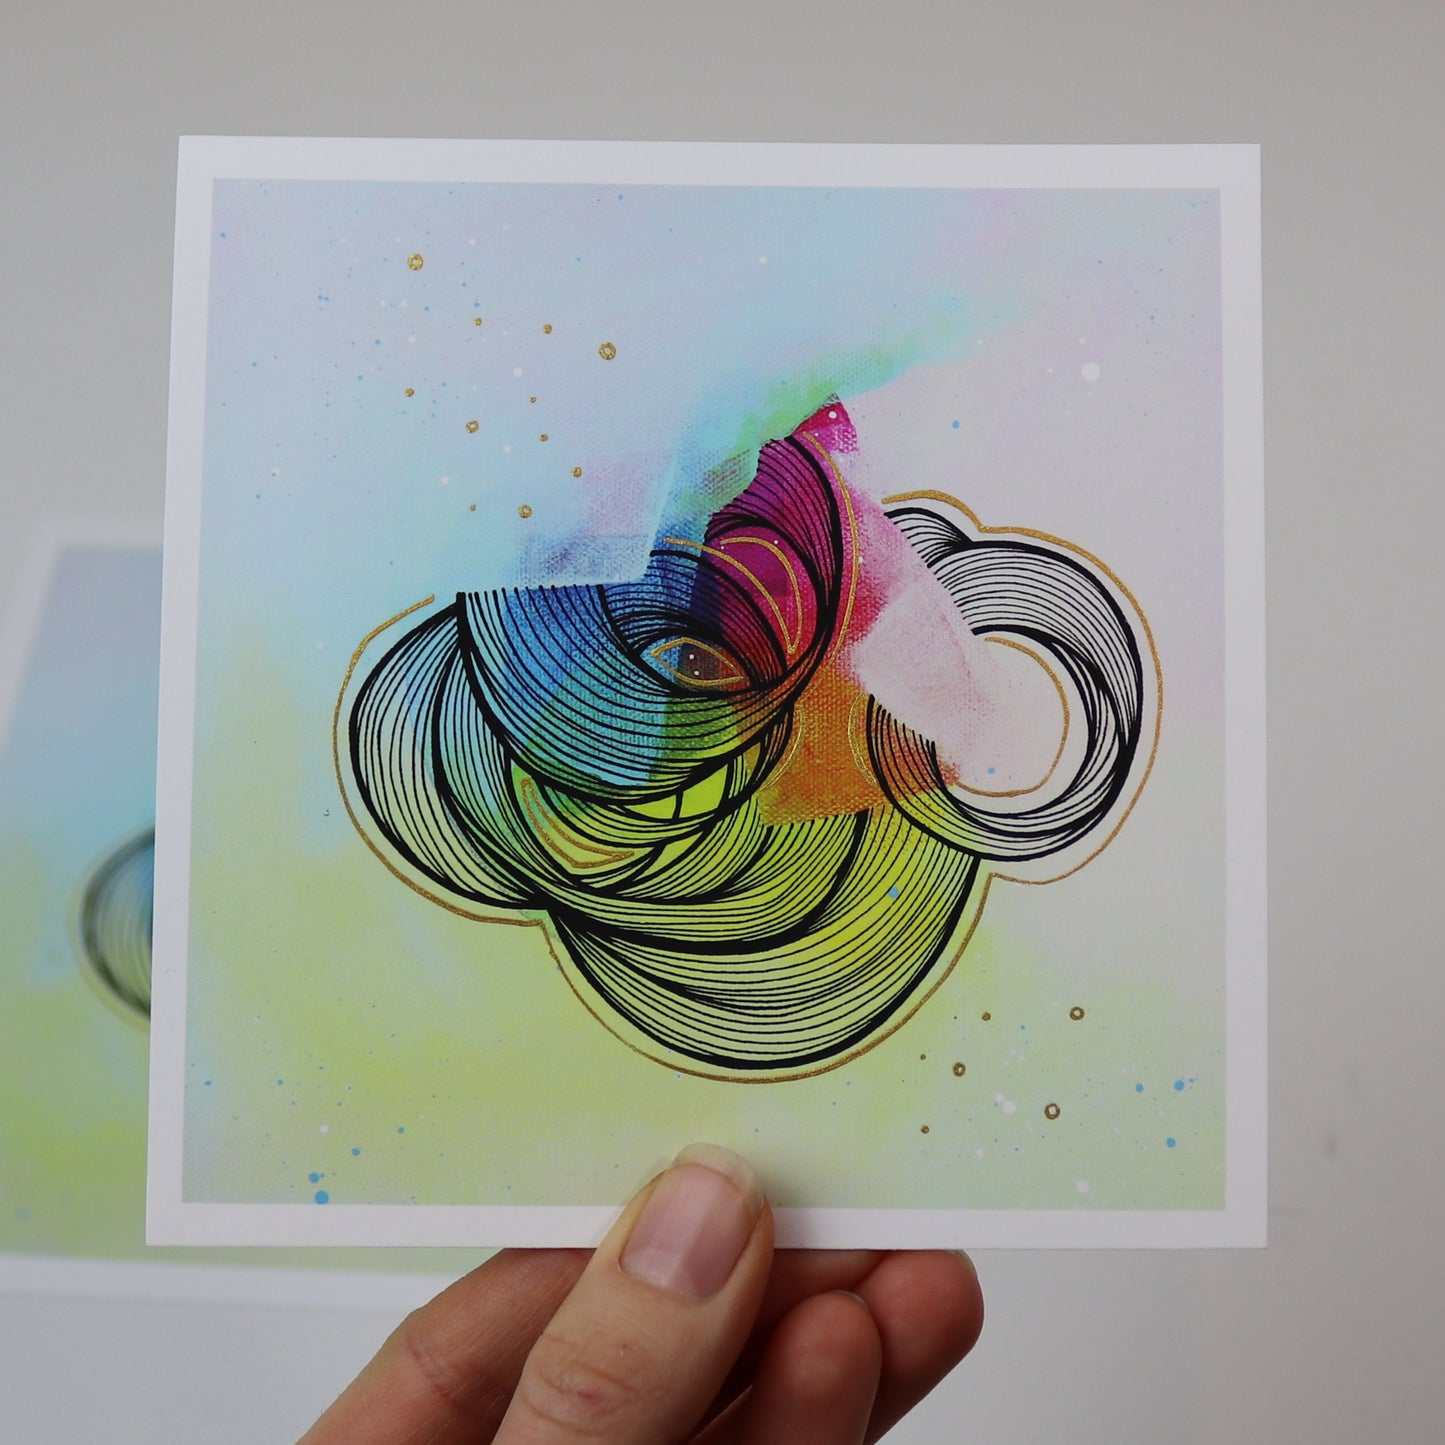 Open Edition Print: "Rainbow Coiling II" Hand Embellished